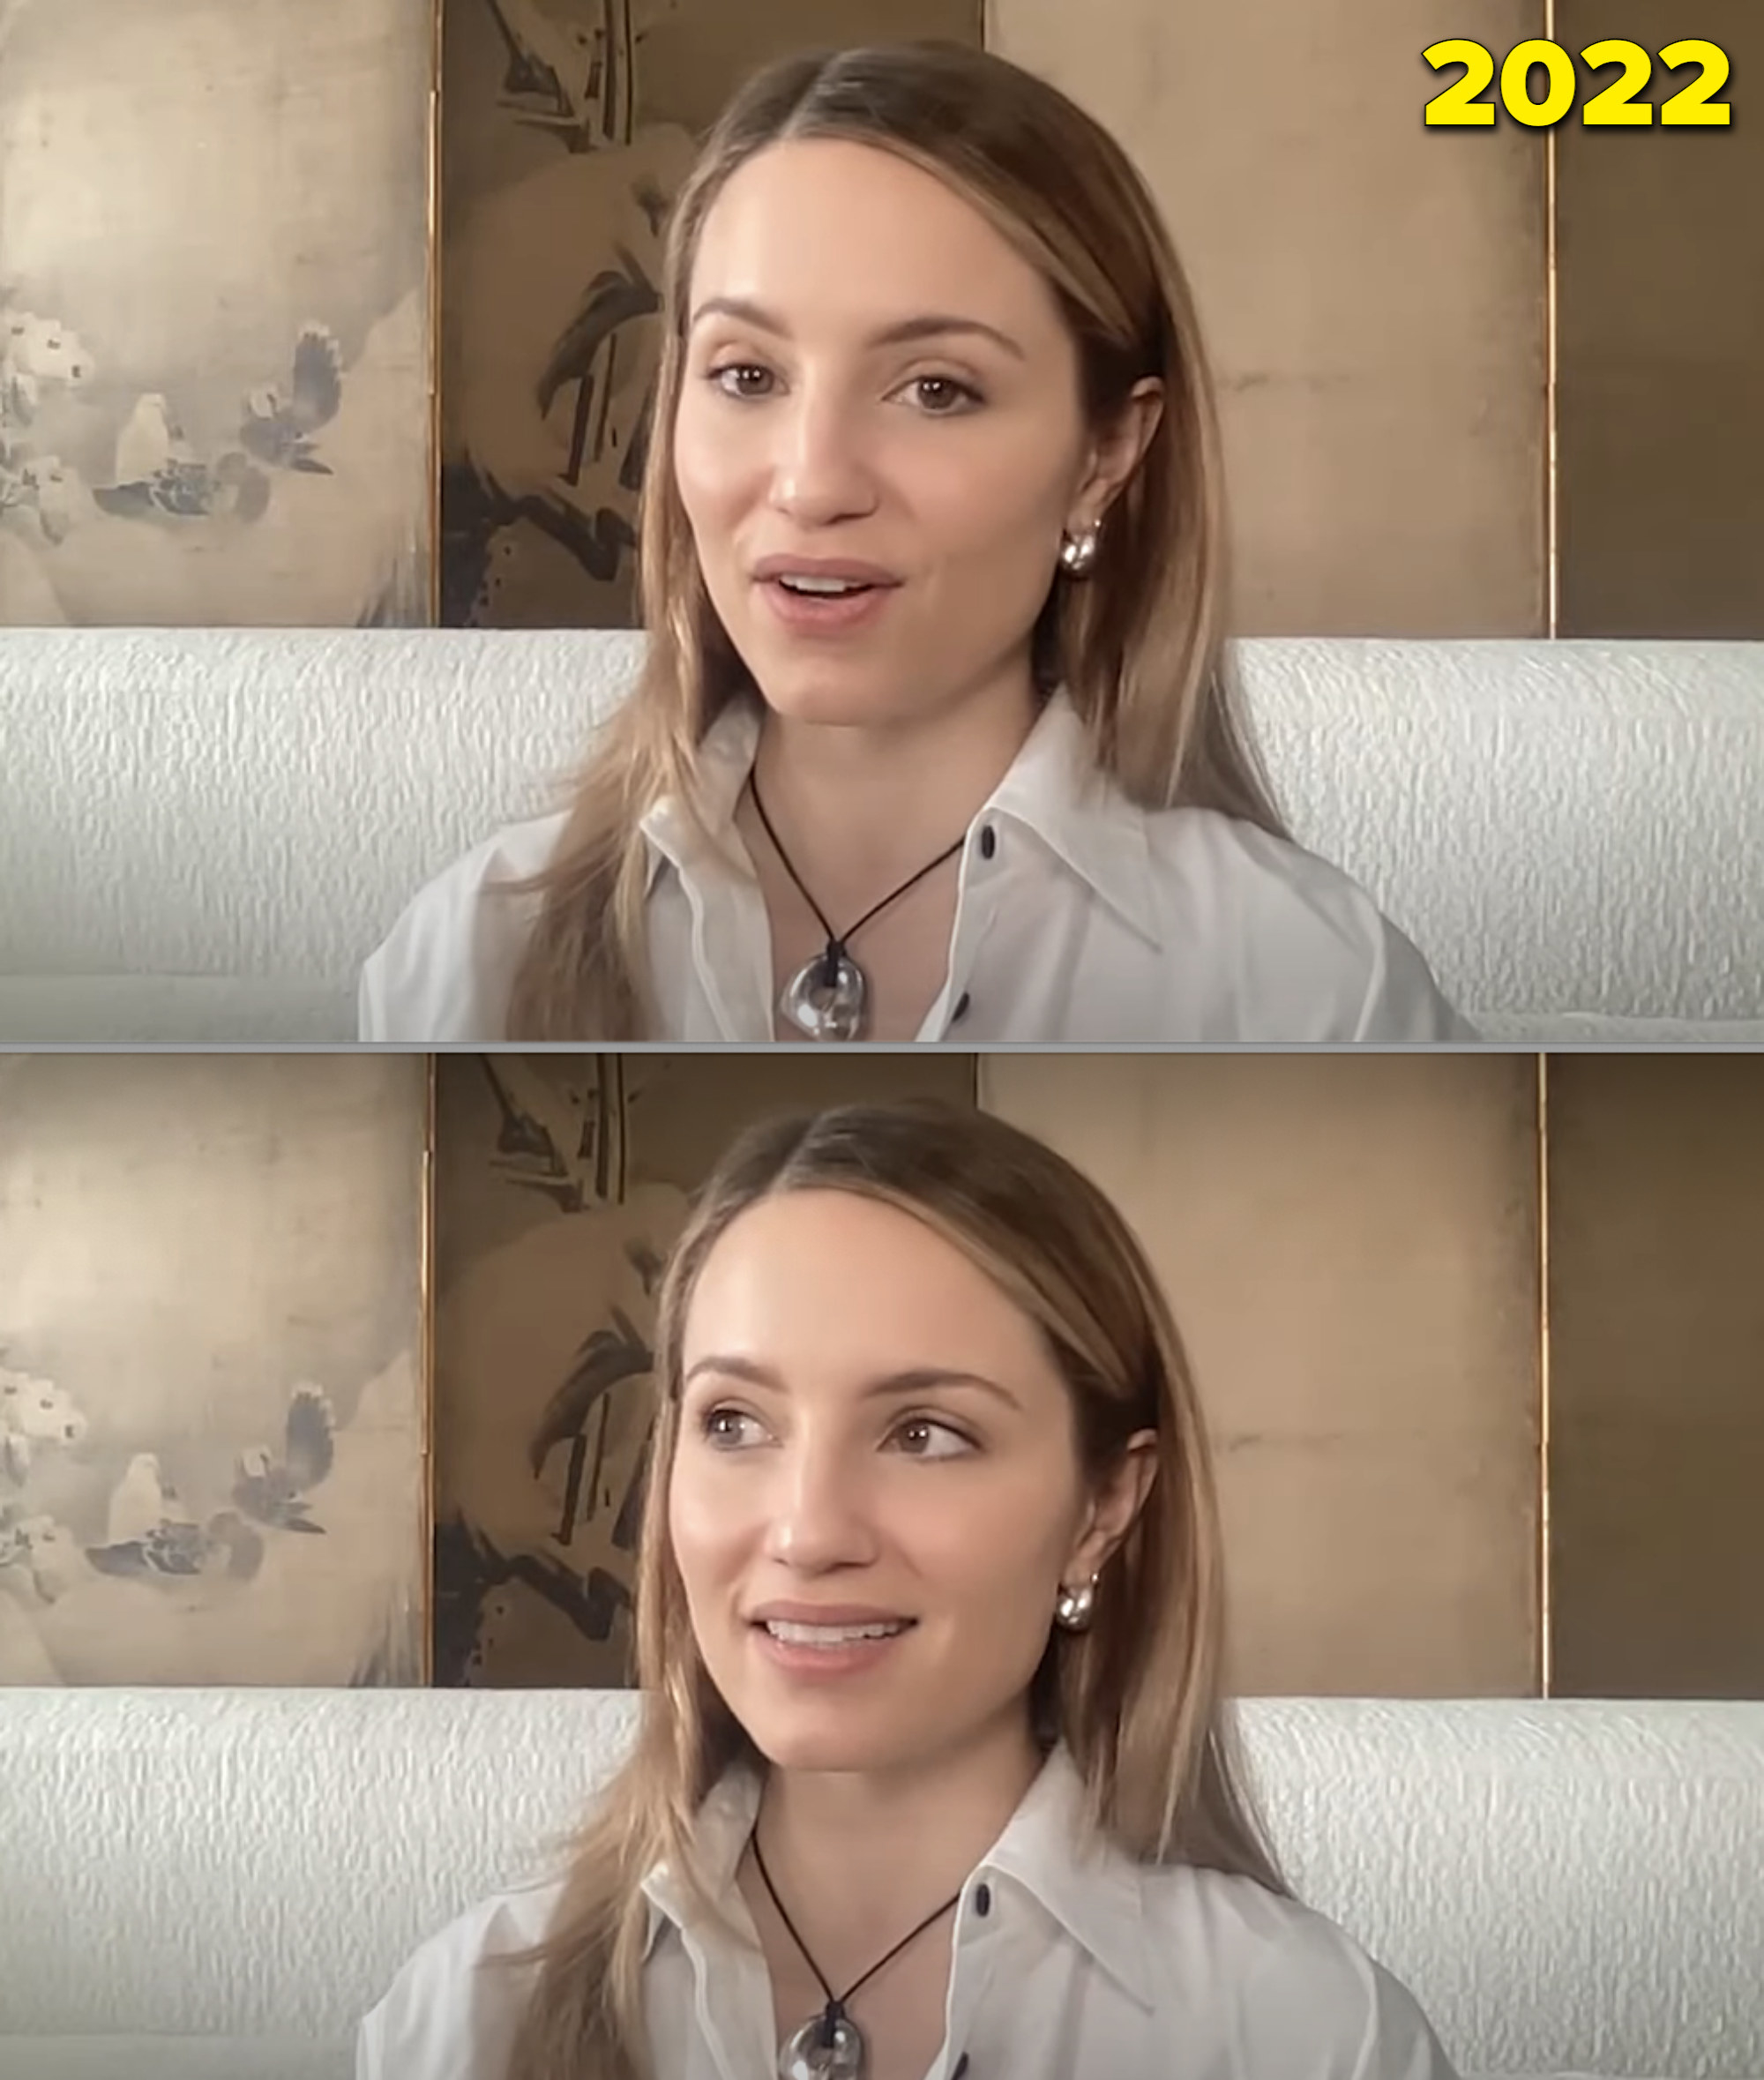 Dianna being interviewed over Zoom in her home